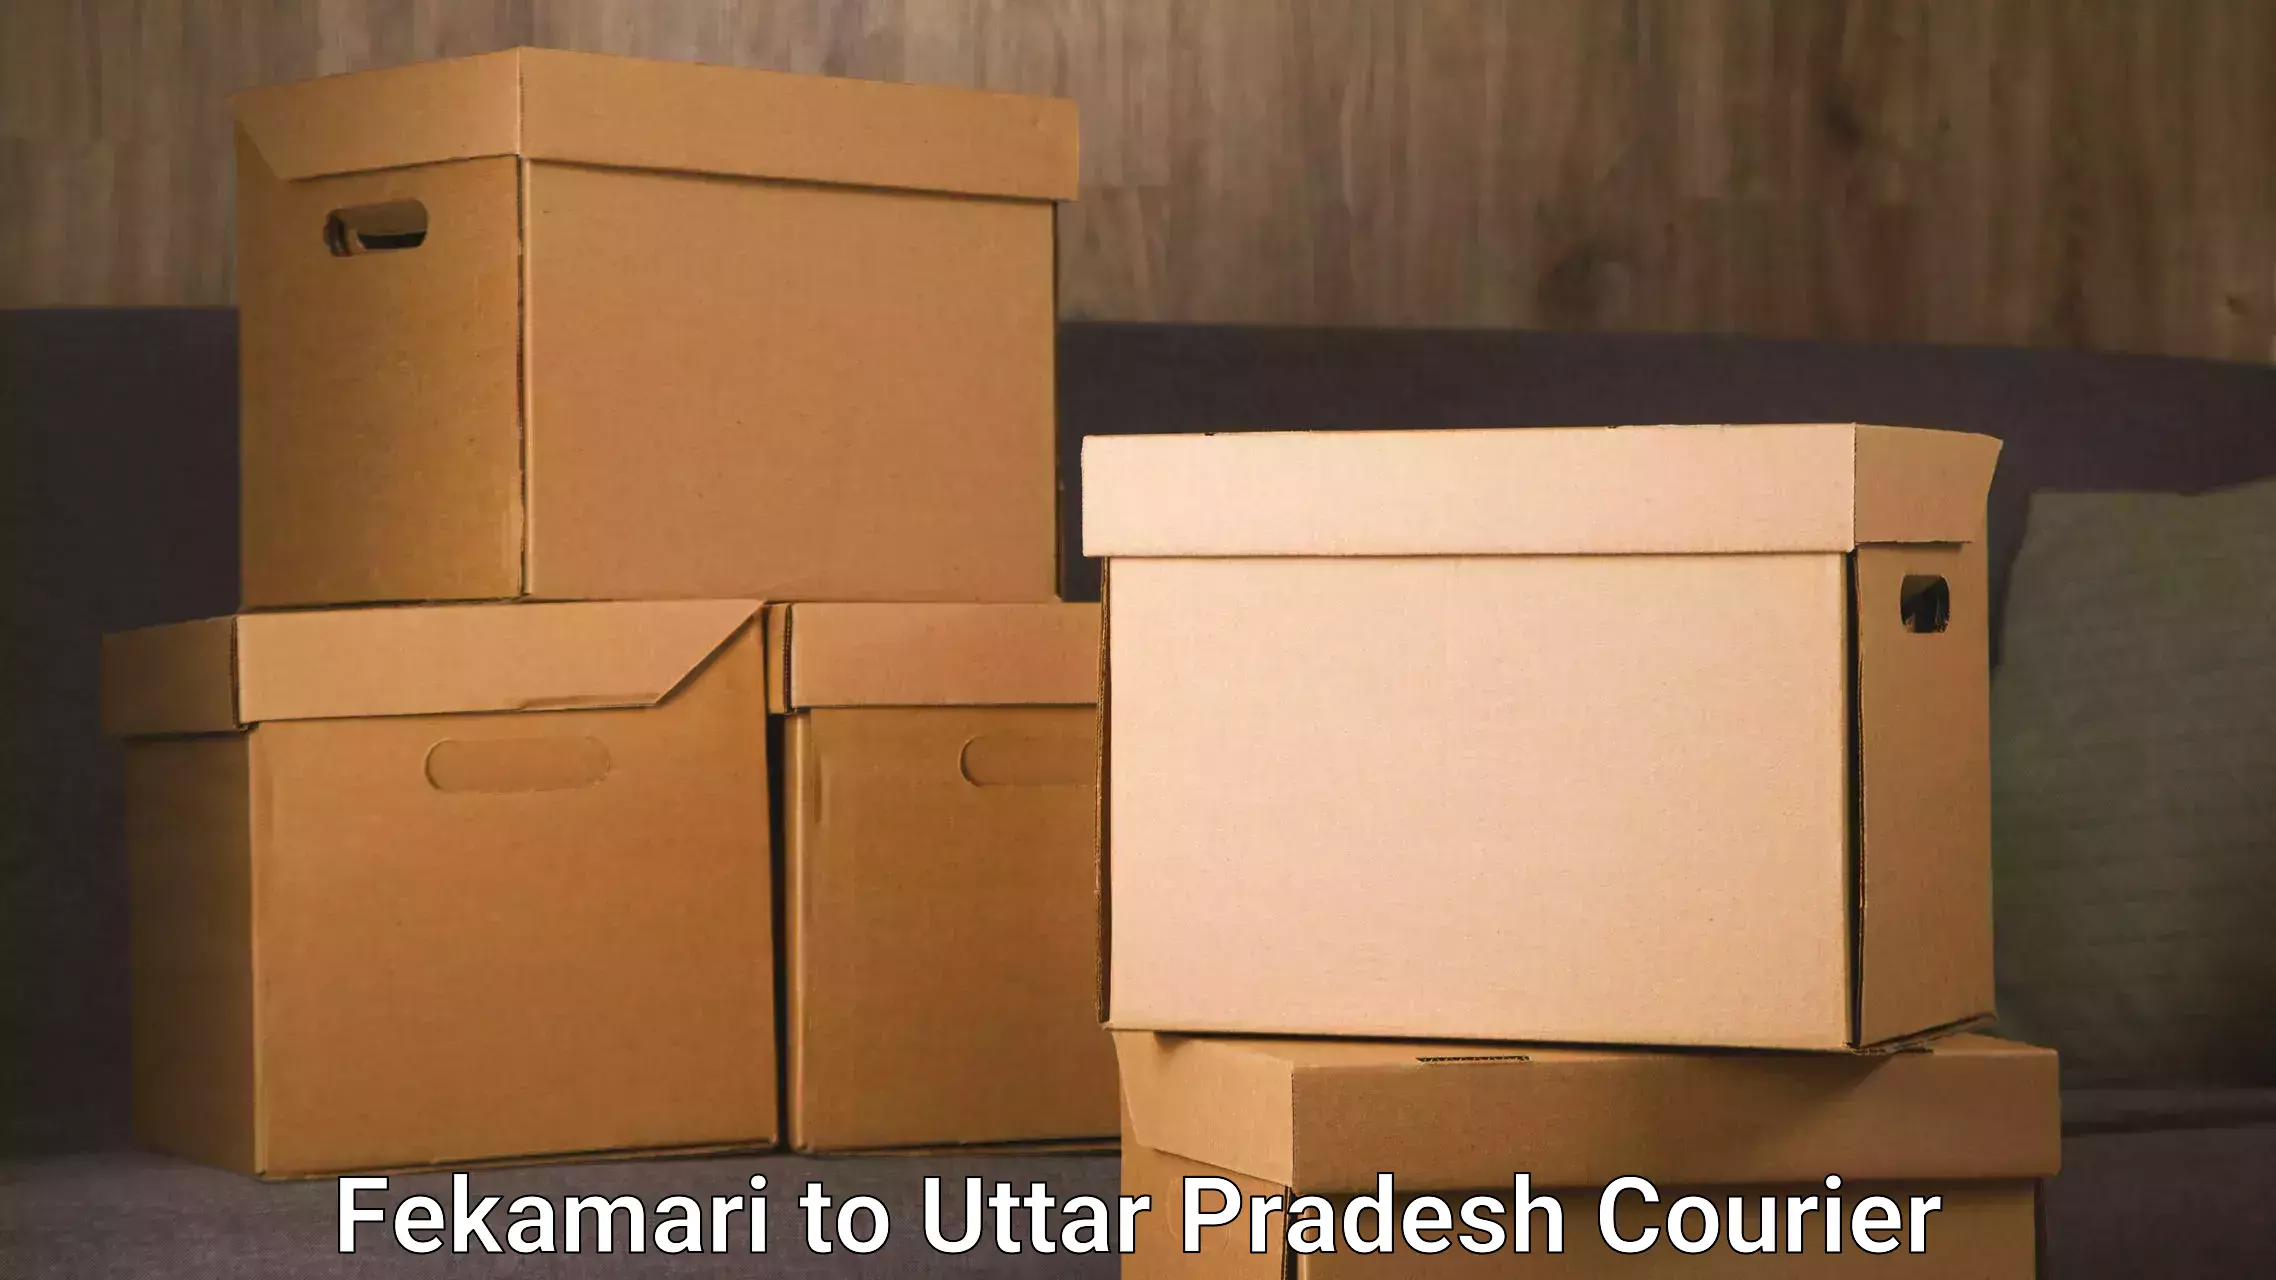 Express delivery capabilities Fekamari to Agra